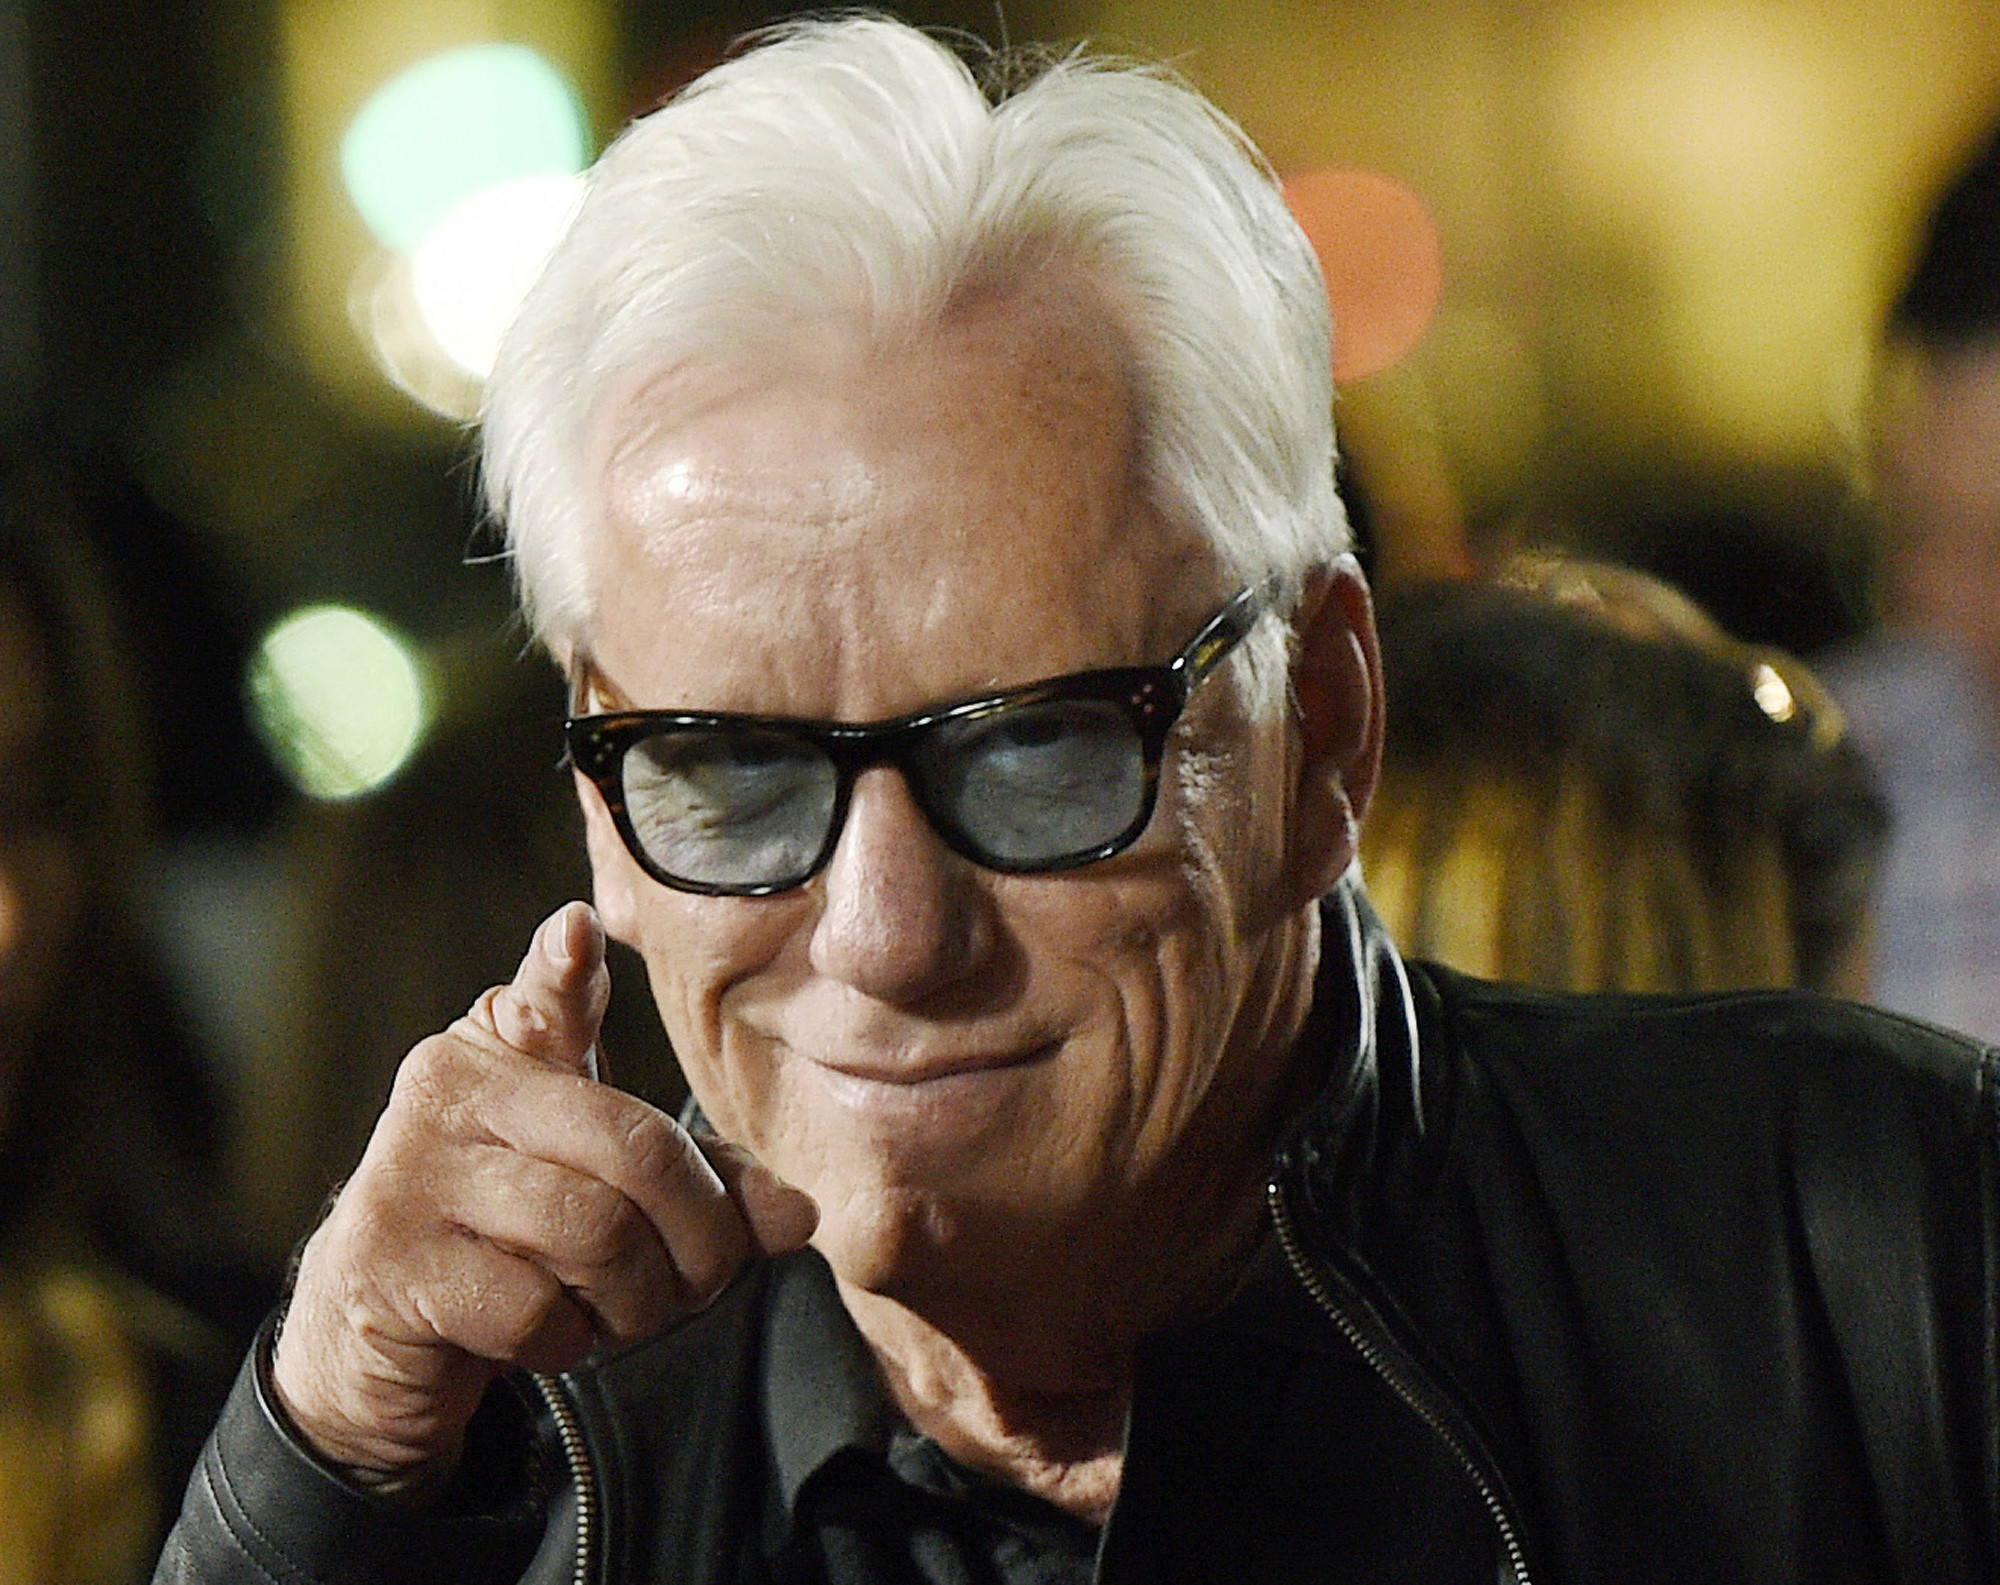 James Woods Isn’t Retiring from Acting to Play Poker Full-Time Just Yet